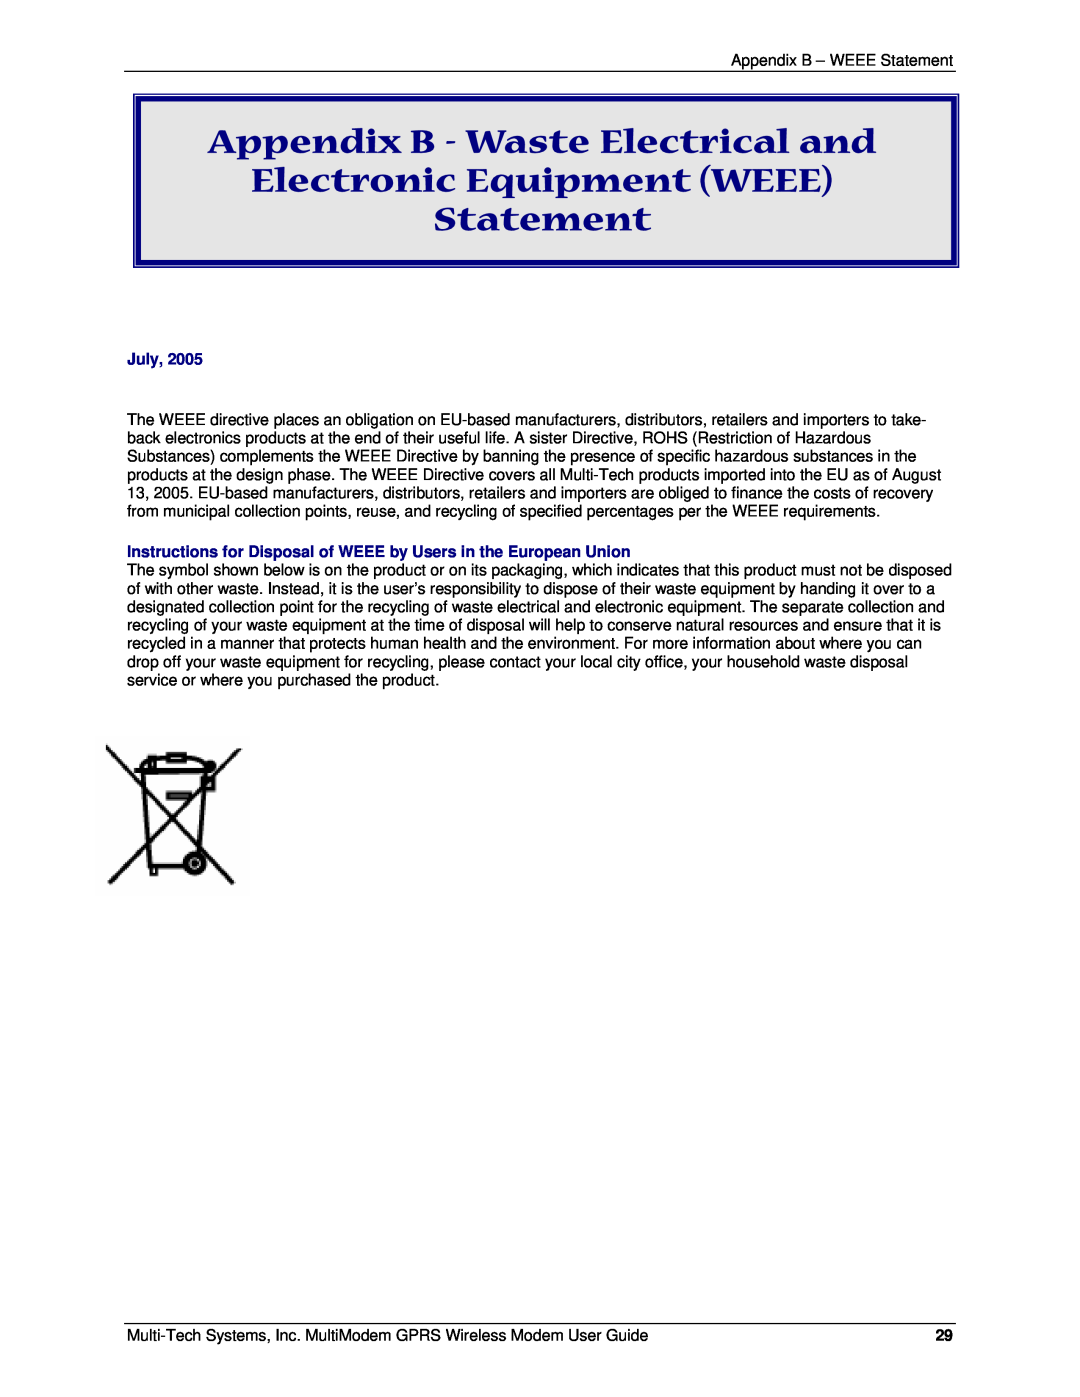 Multi-Tech Systems F2, MTCBA-G-F1 manual July, Instructions for Disposal of WEEE by Users in the European Union 